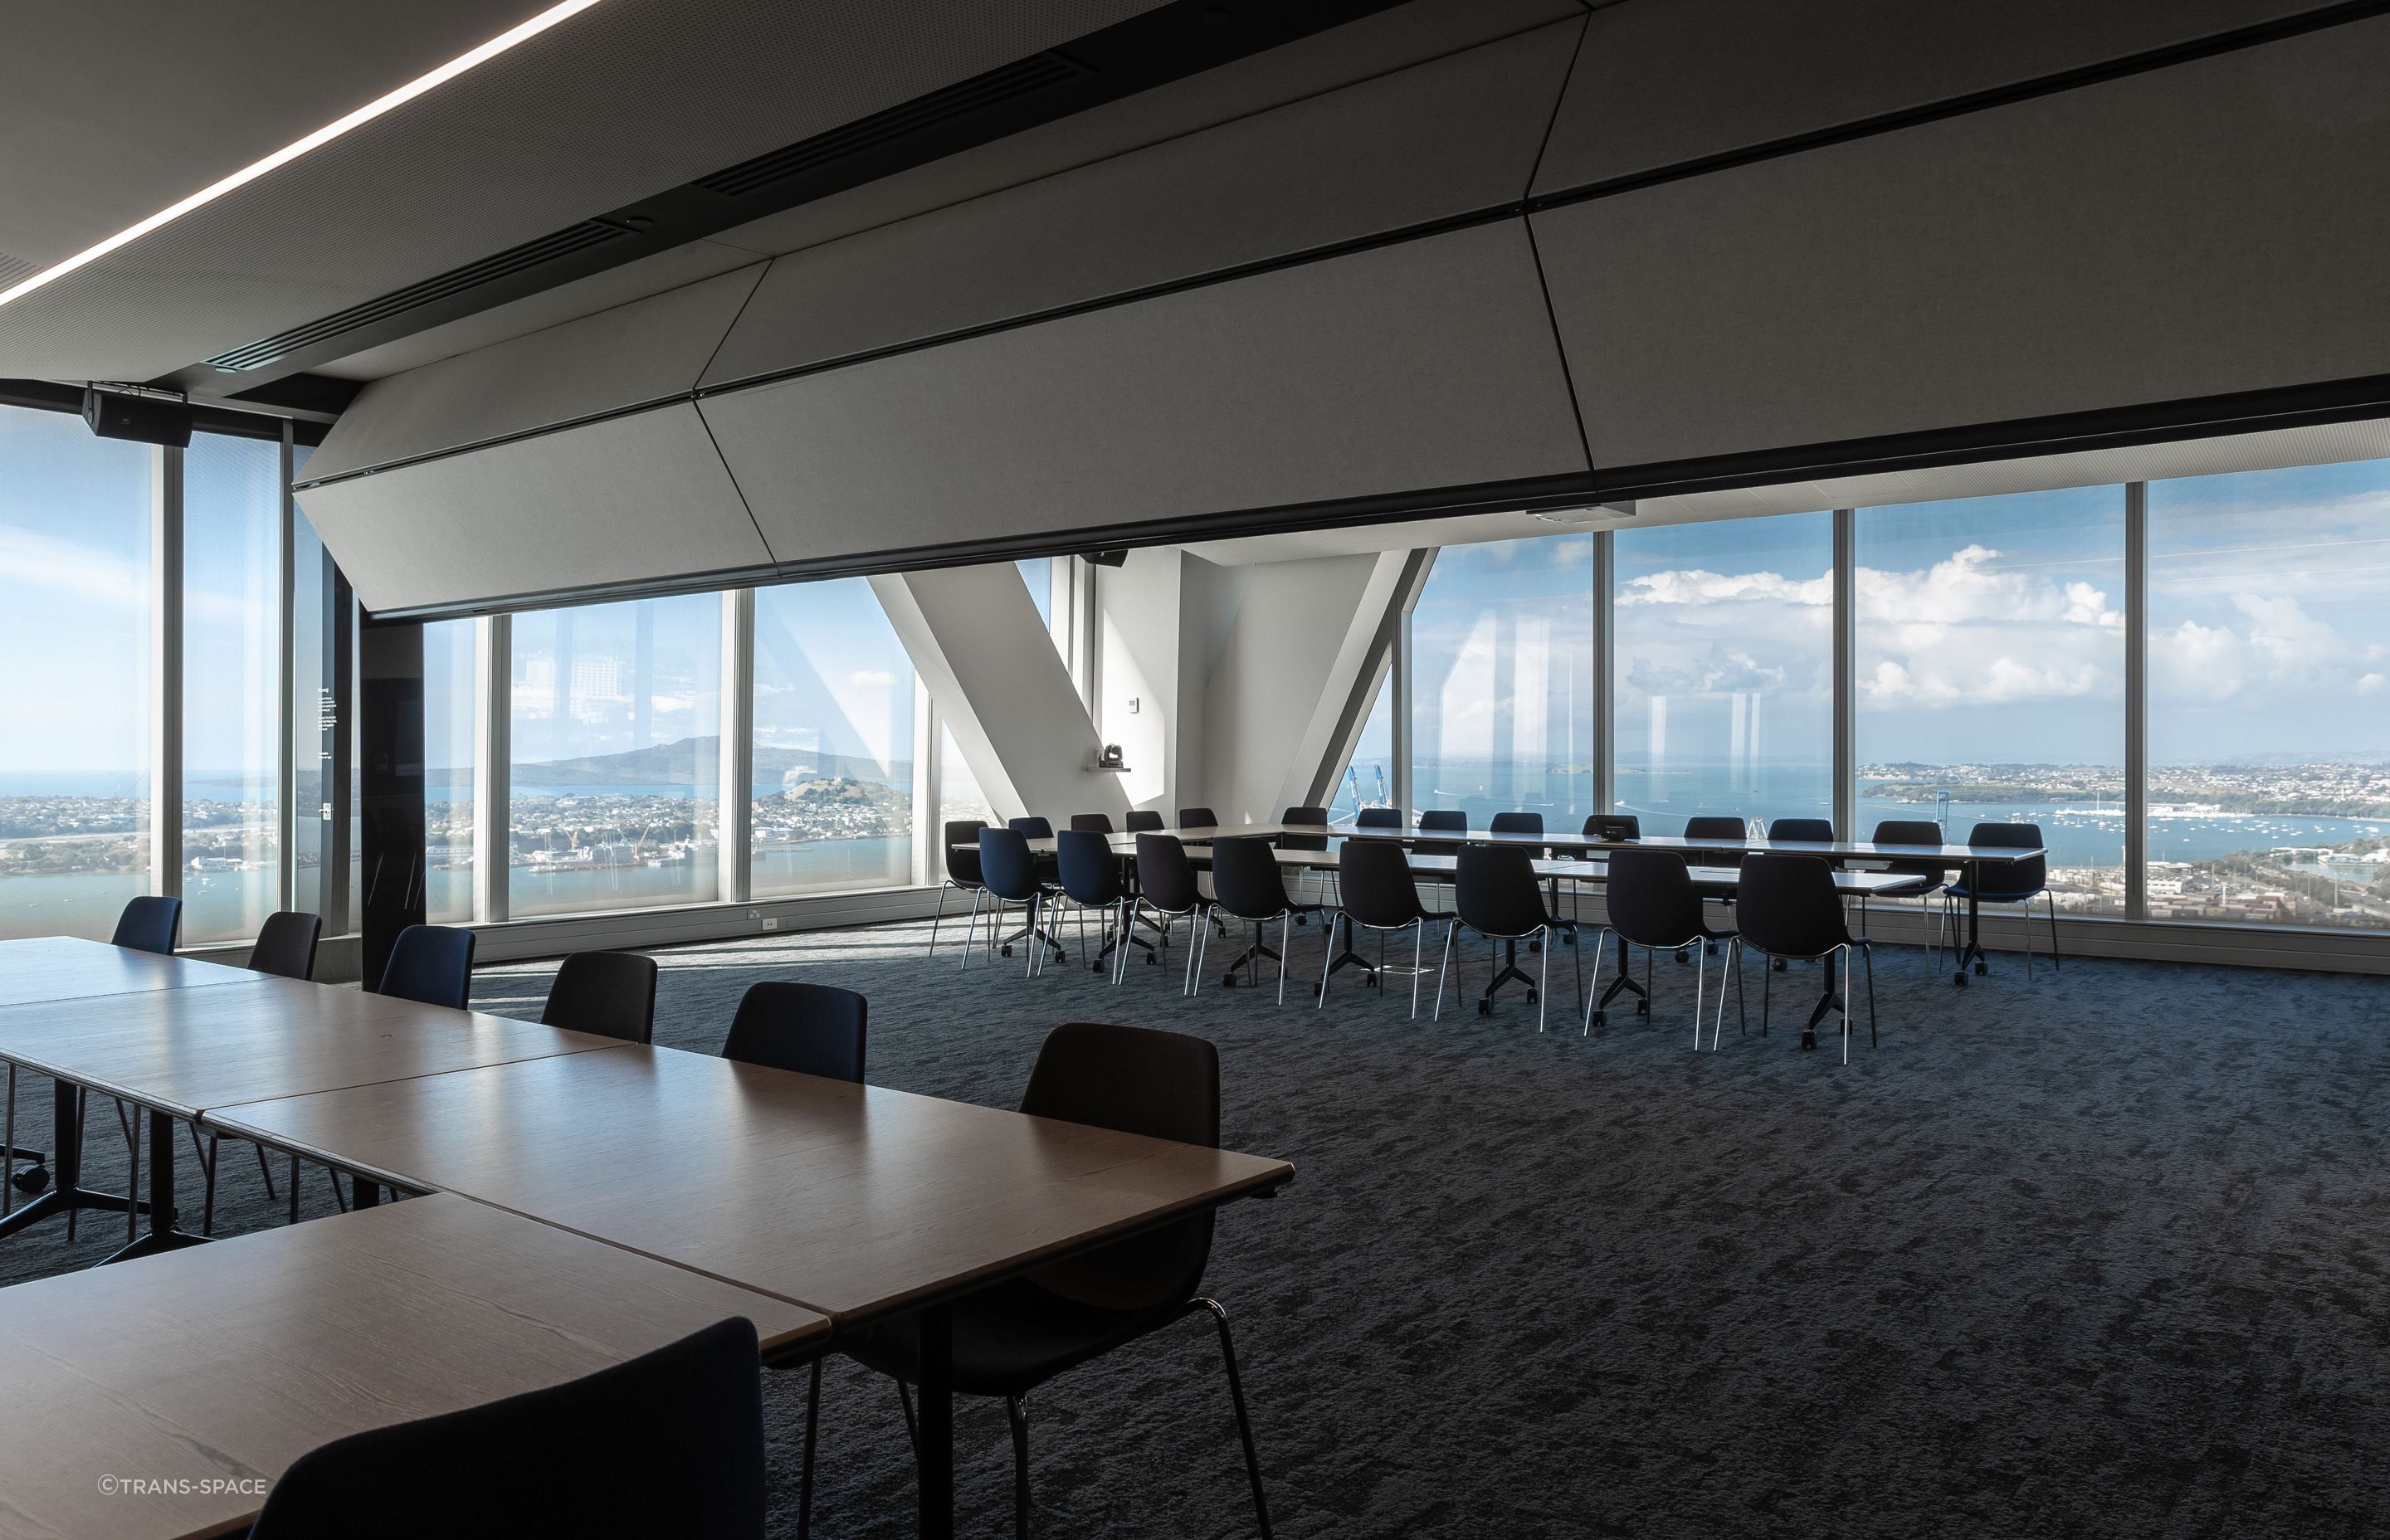 Skyfold Acoustic Vertical Retractable Walls are a quick and easy space management solution to reconfigure multifunctional rooms.